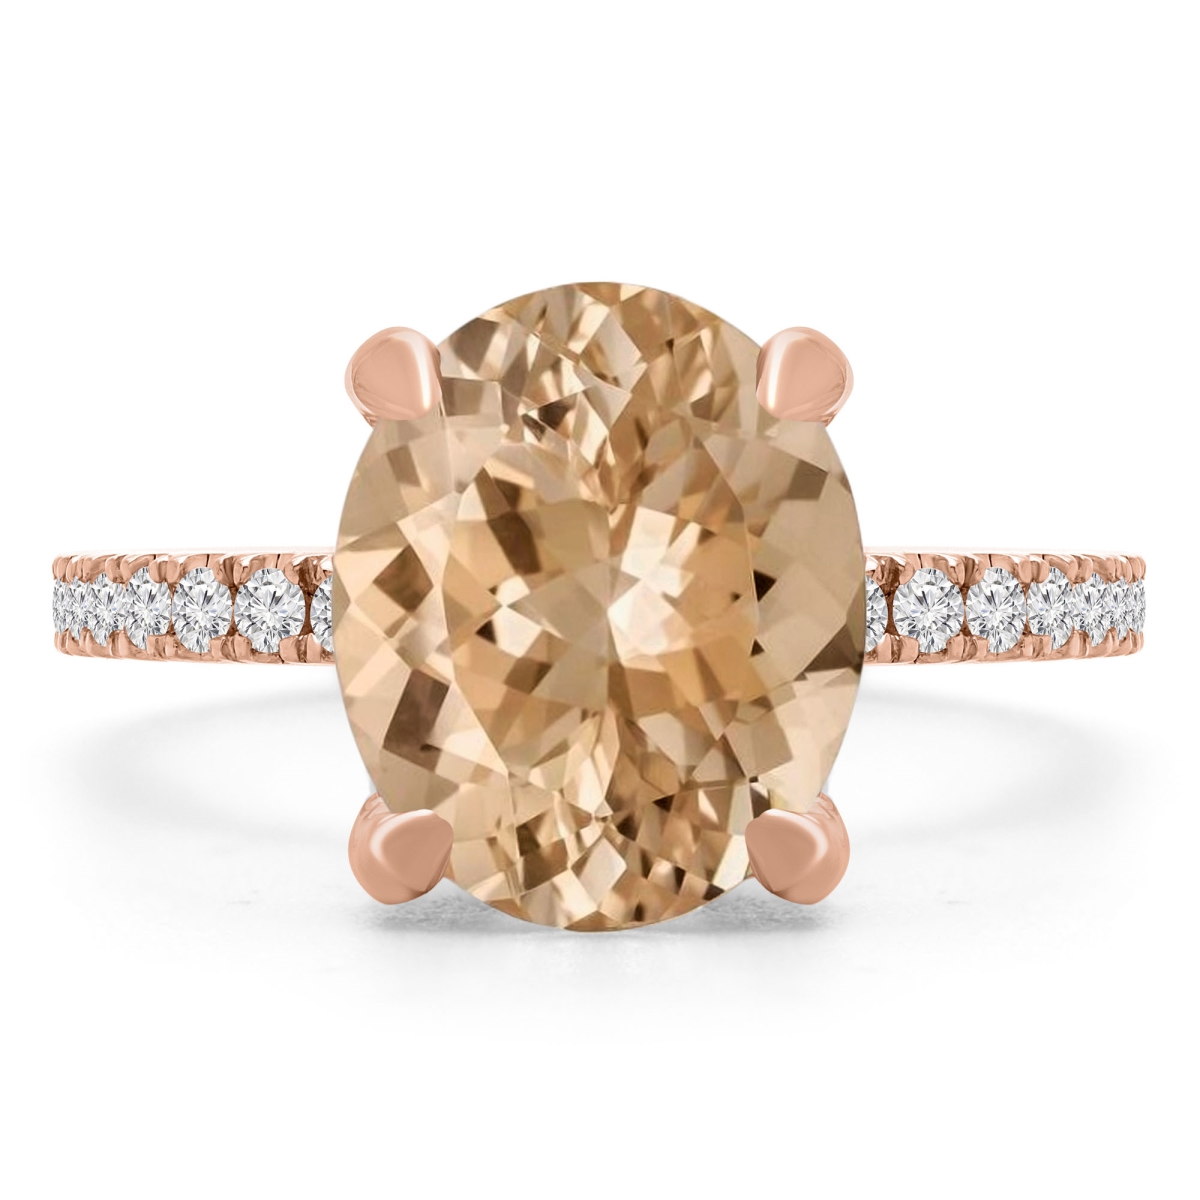 Picture of Majesty Diamonds MD190408-4.25 3.4 CTW Oval Pink Morganite Under Halo Engagement Ring in 14K Rose Gold - Size 4.25